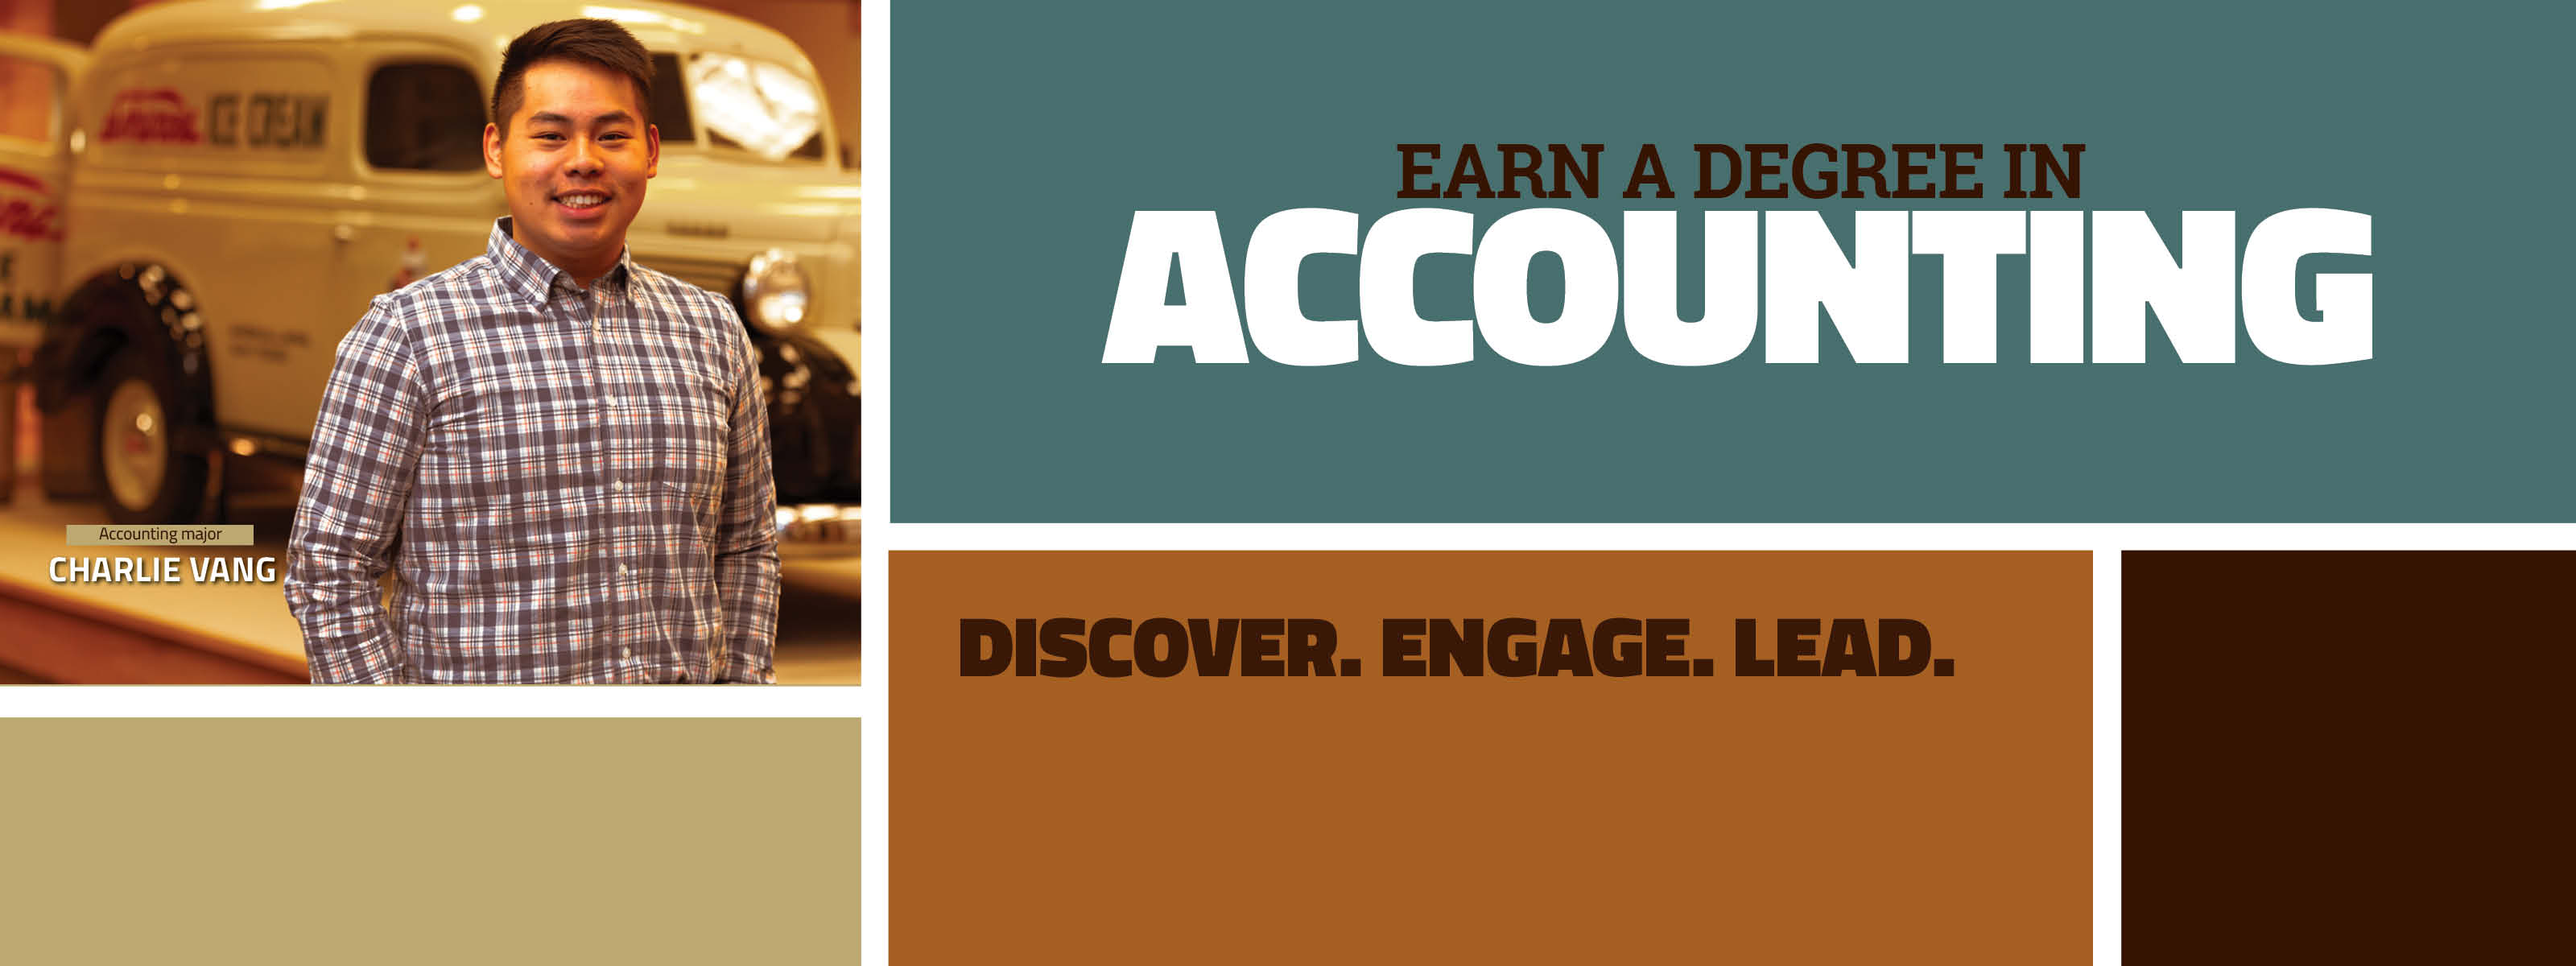 Earn A Degree In Accounting - Discover. Engage. Lead.